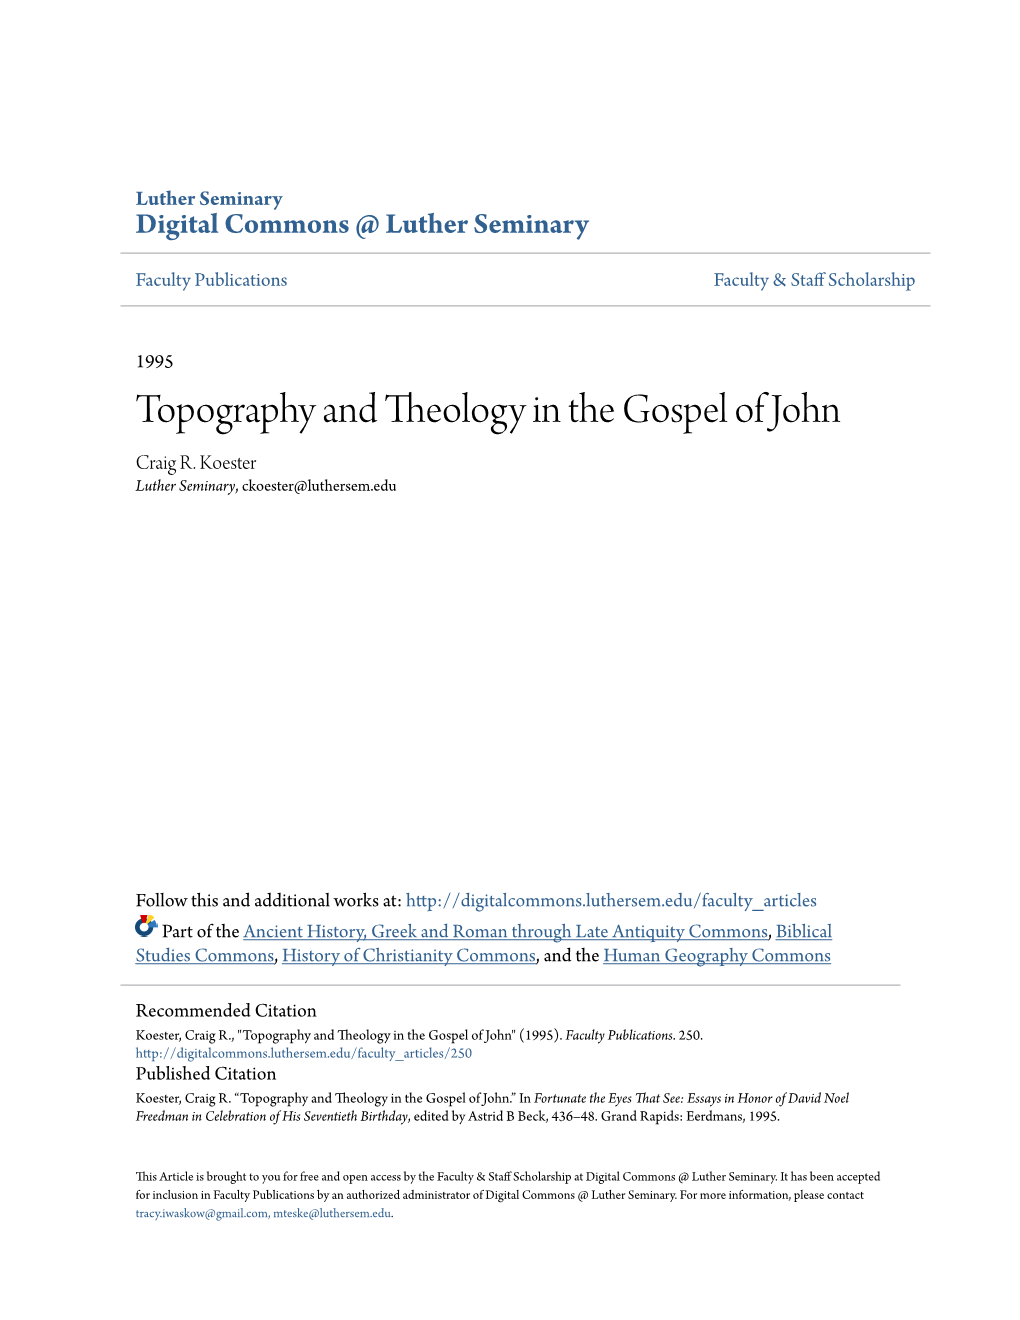 Topography and Theology in the Gospel of John Craig R